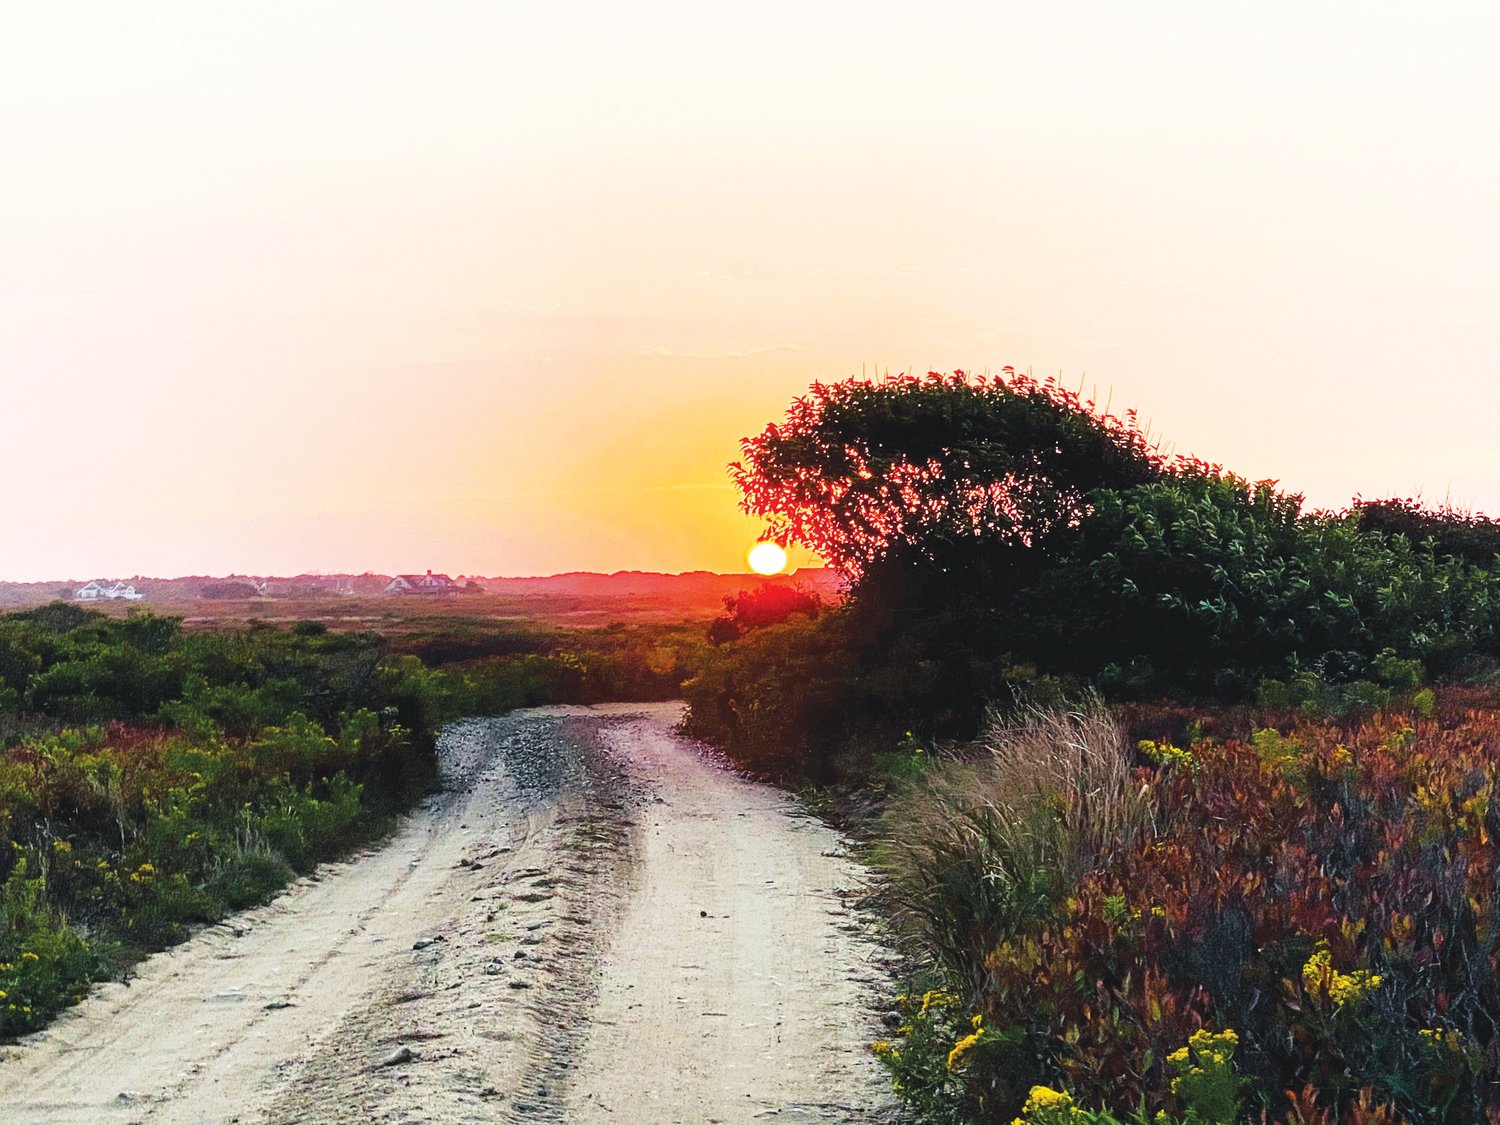 The sun sets over the Nantucket Land Bank’s Smooth Hummocks property, one of its many open-space holdings open to the public.